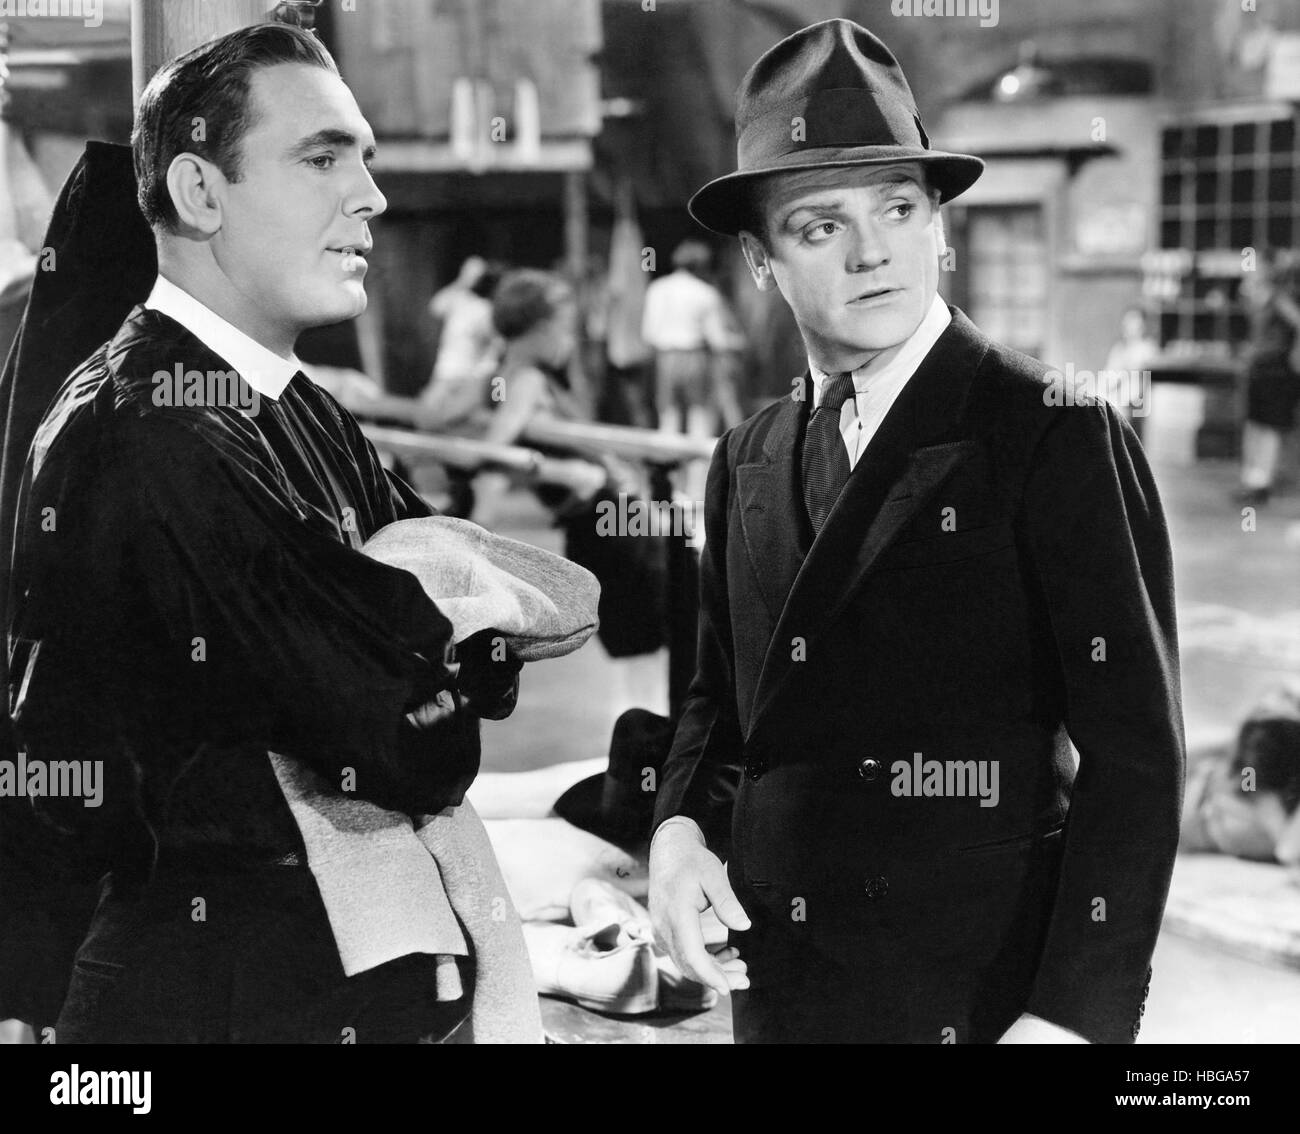 ANGELS WITH DIRTY FACES, from left, Pat O'Brien, James Cagney, 1938 ...